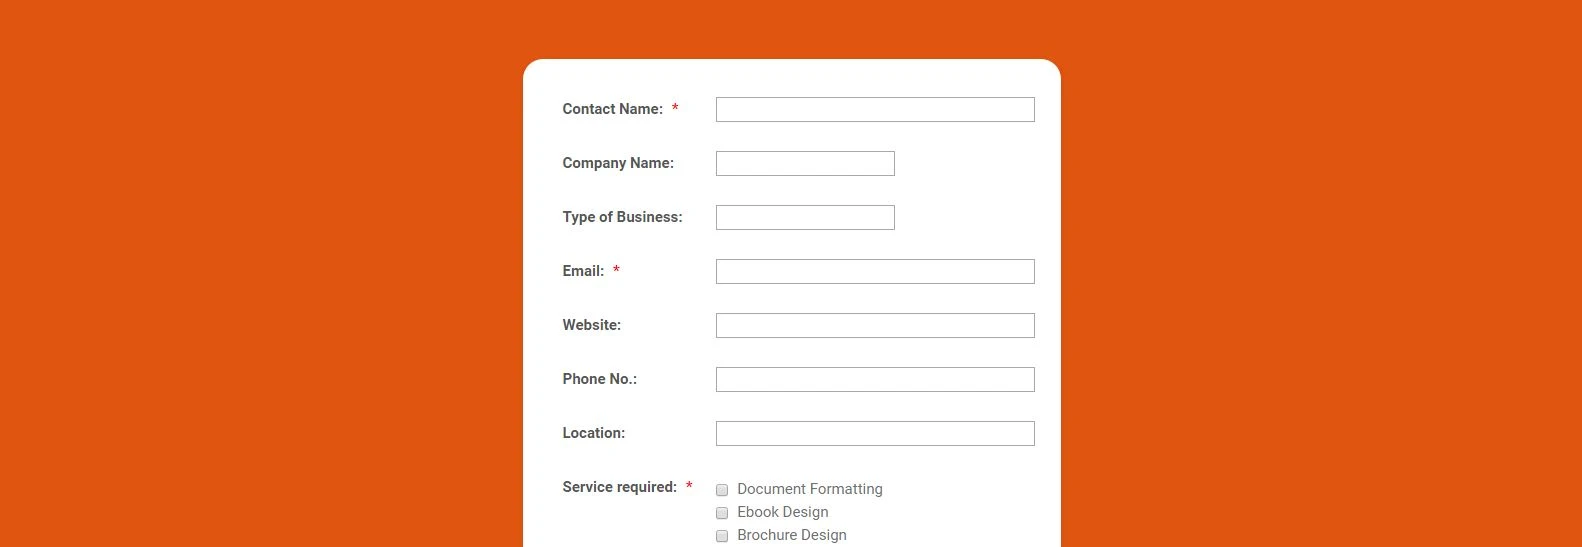 How to center the form? Image 1 Screenshot 20